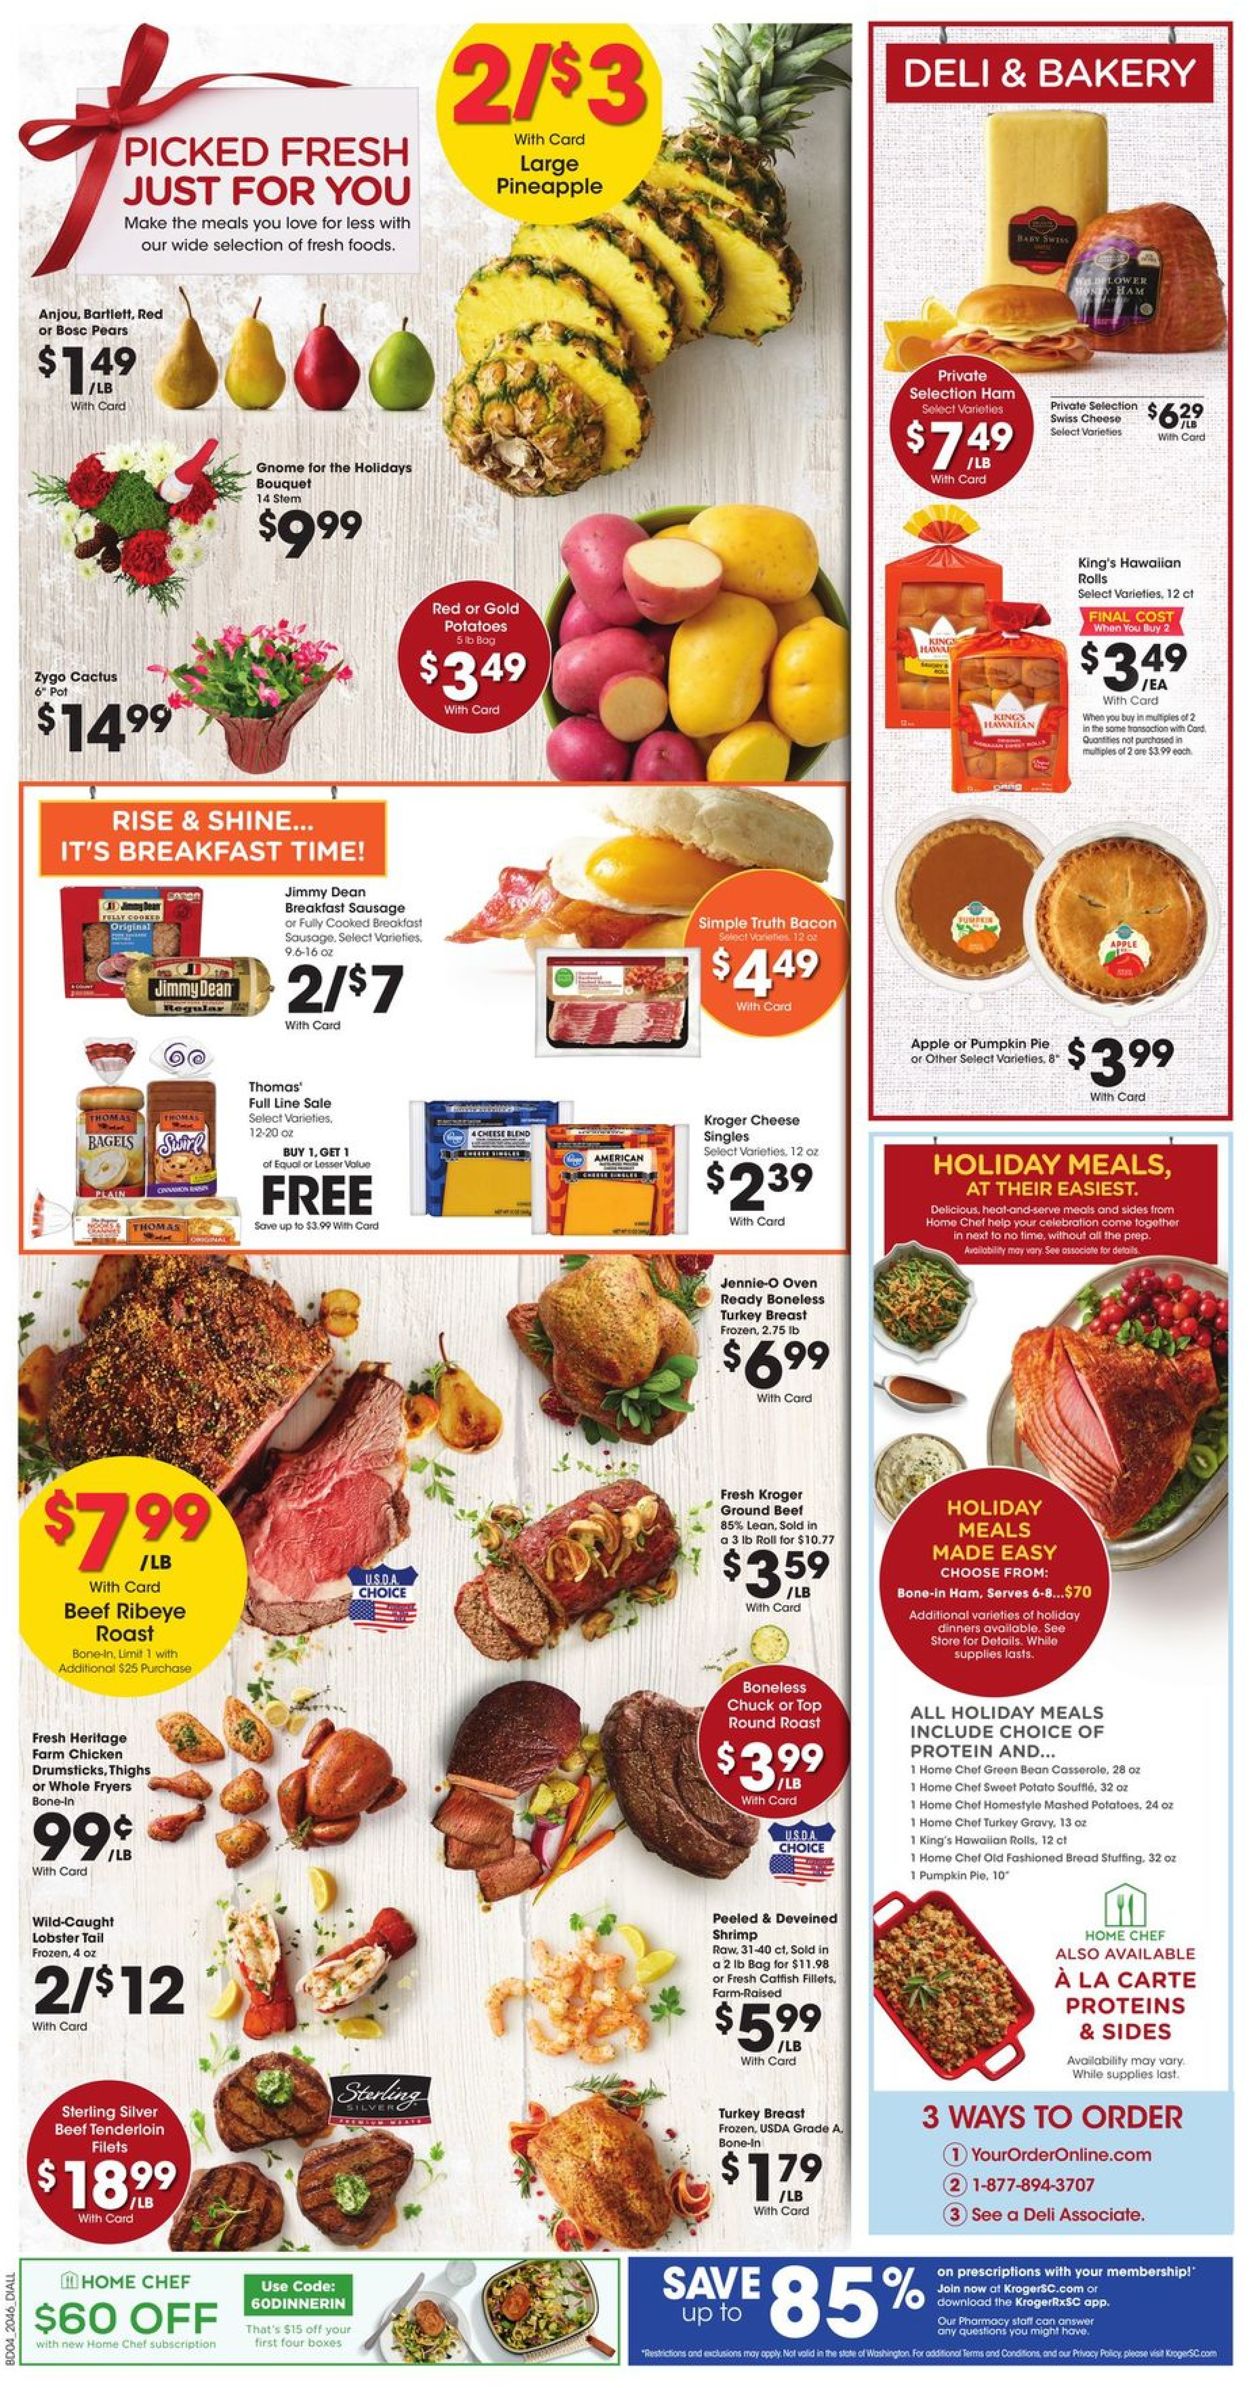 Catalogue Dillons Christmas Ad 2020 from 12/16/2020